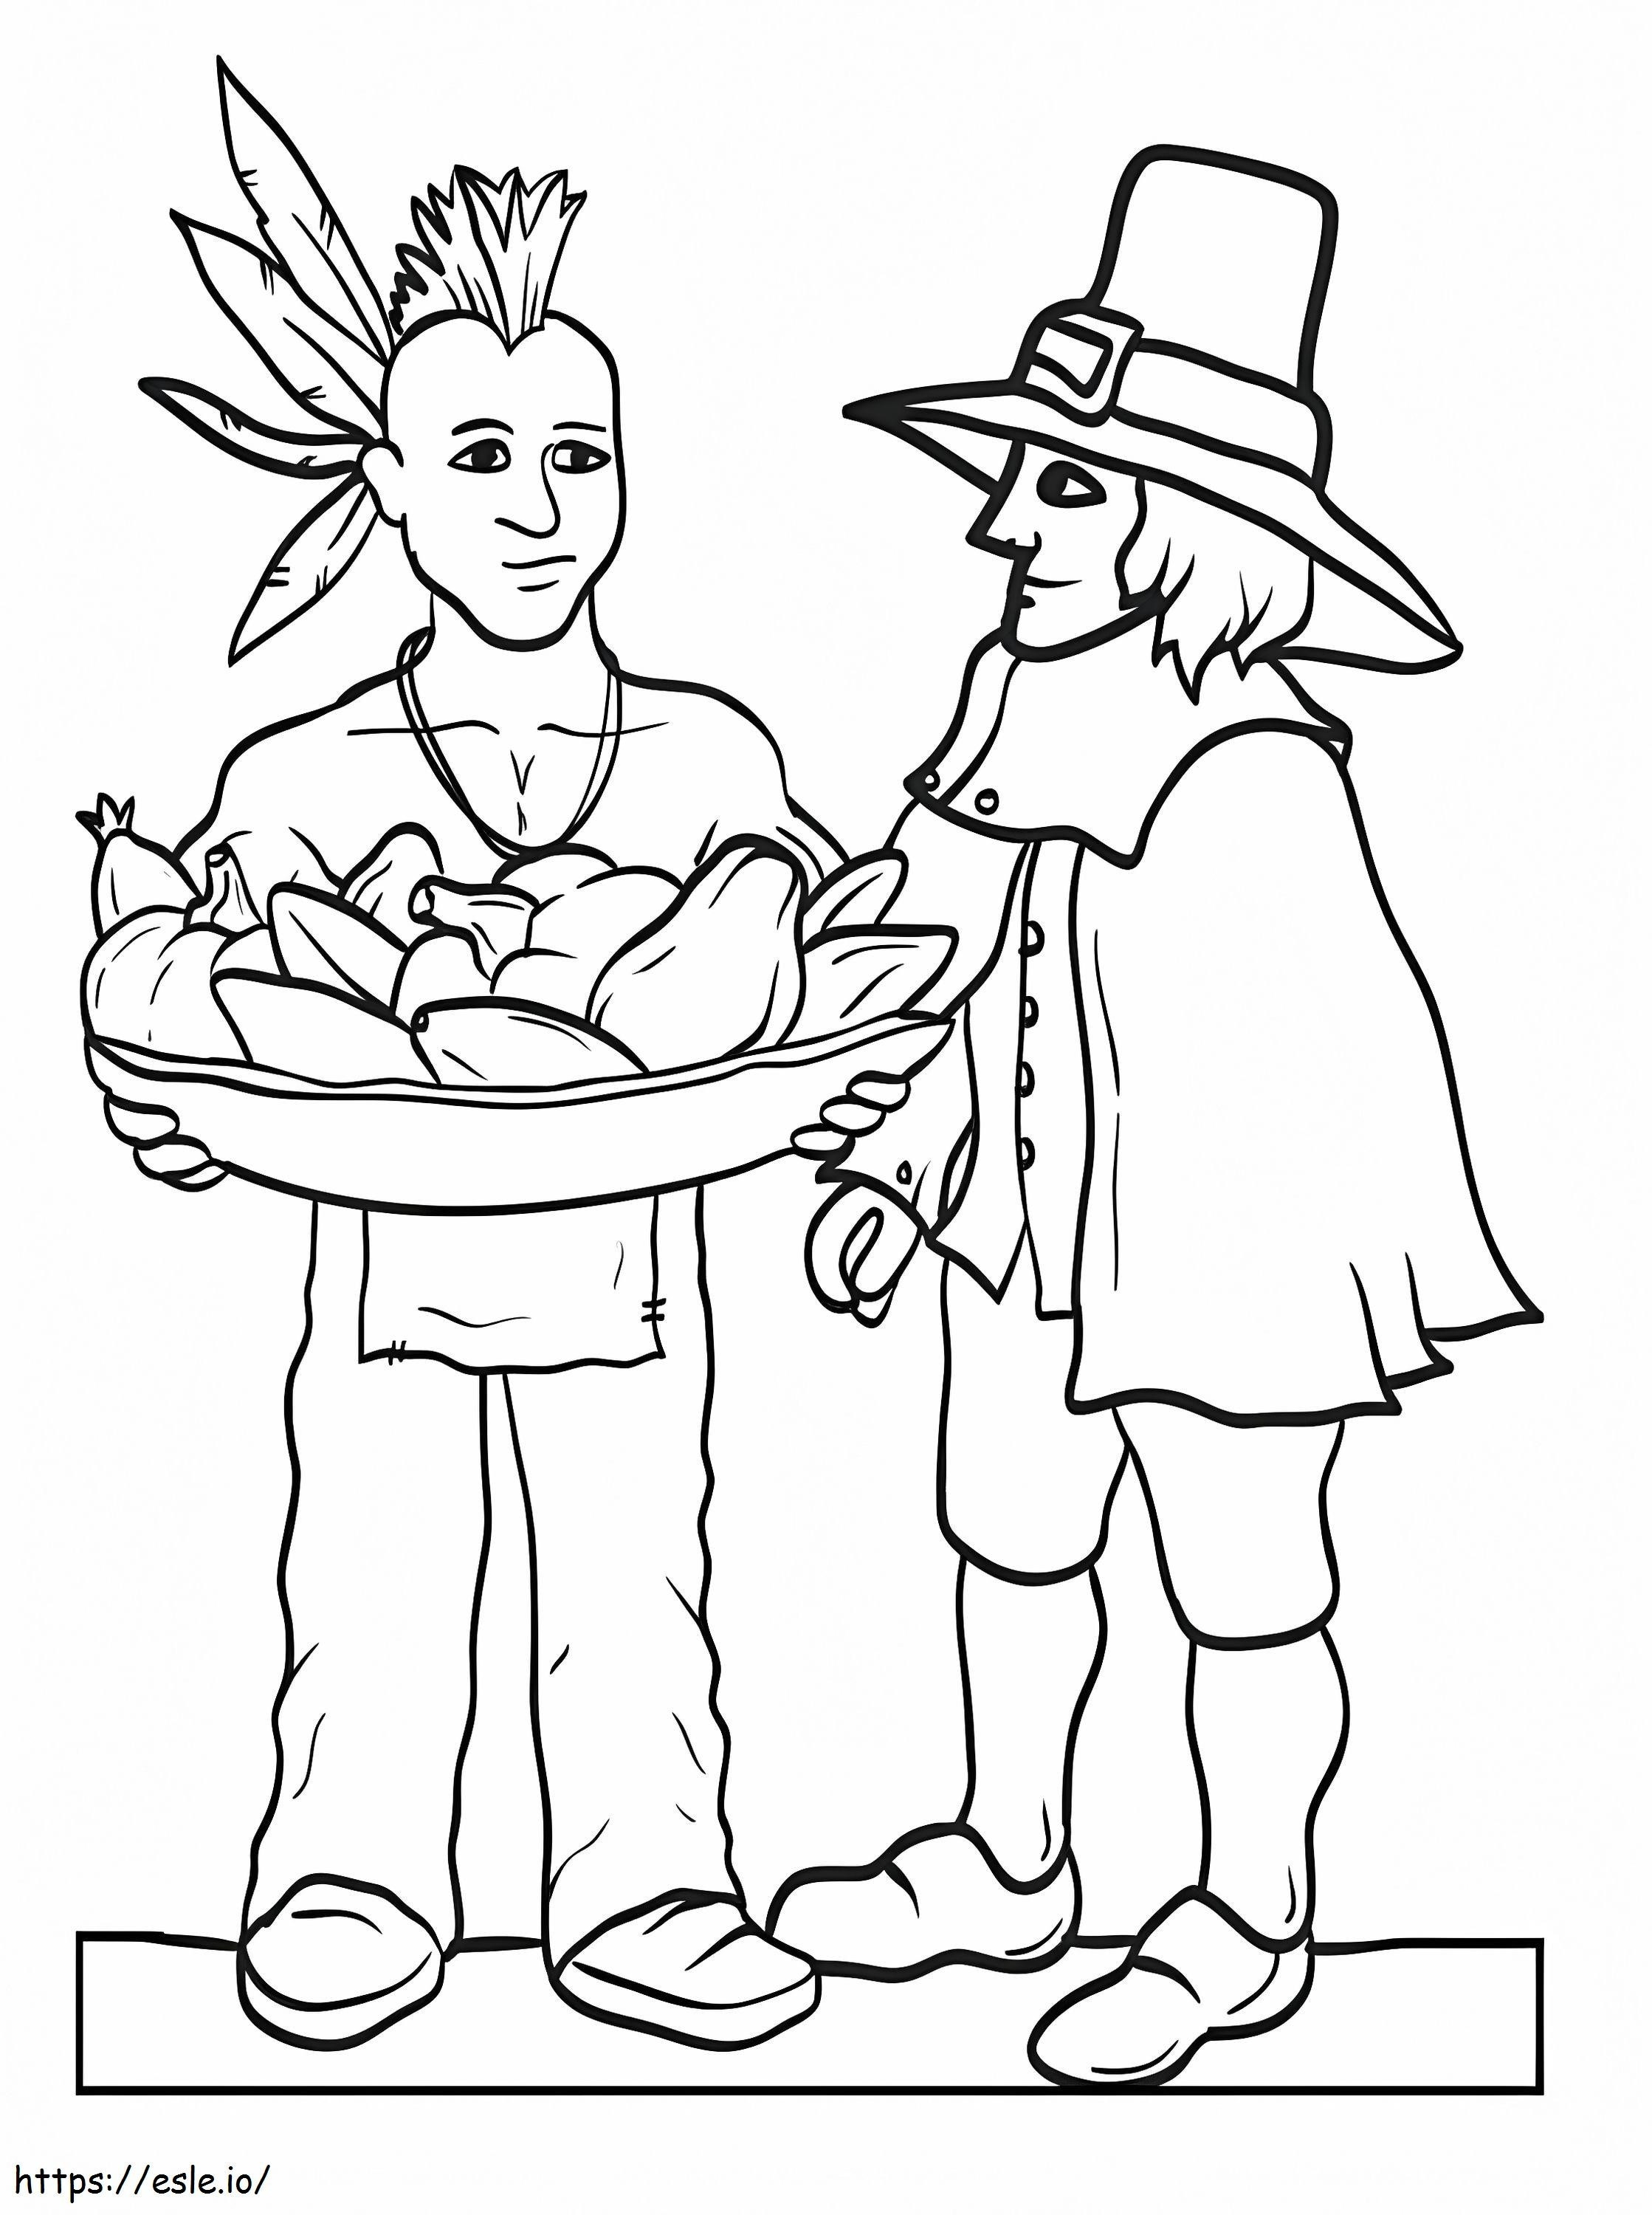 Pilgrim And Indian coloring page